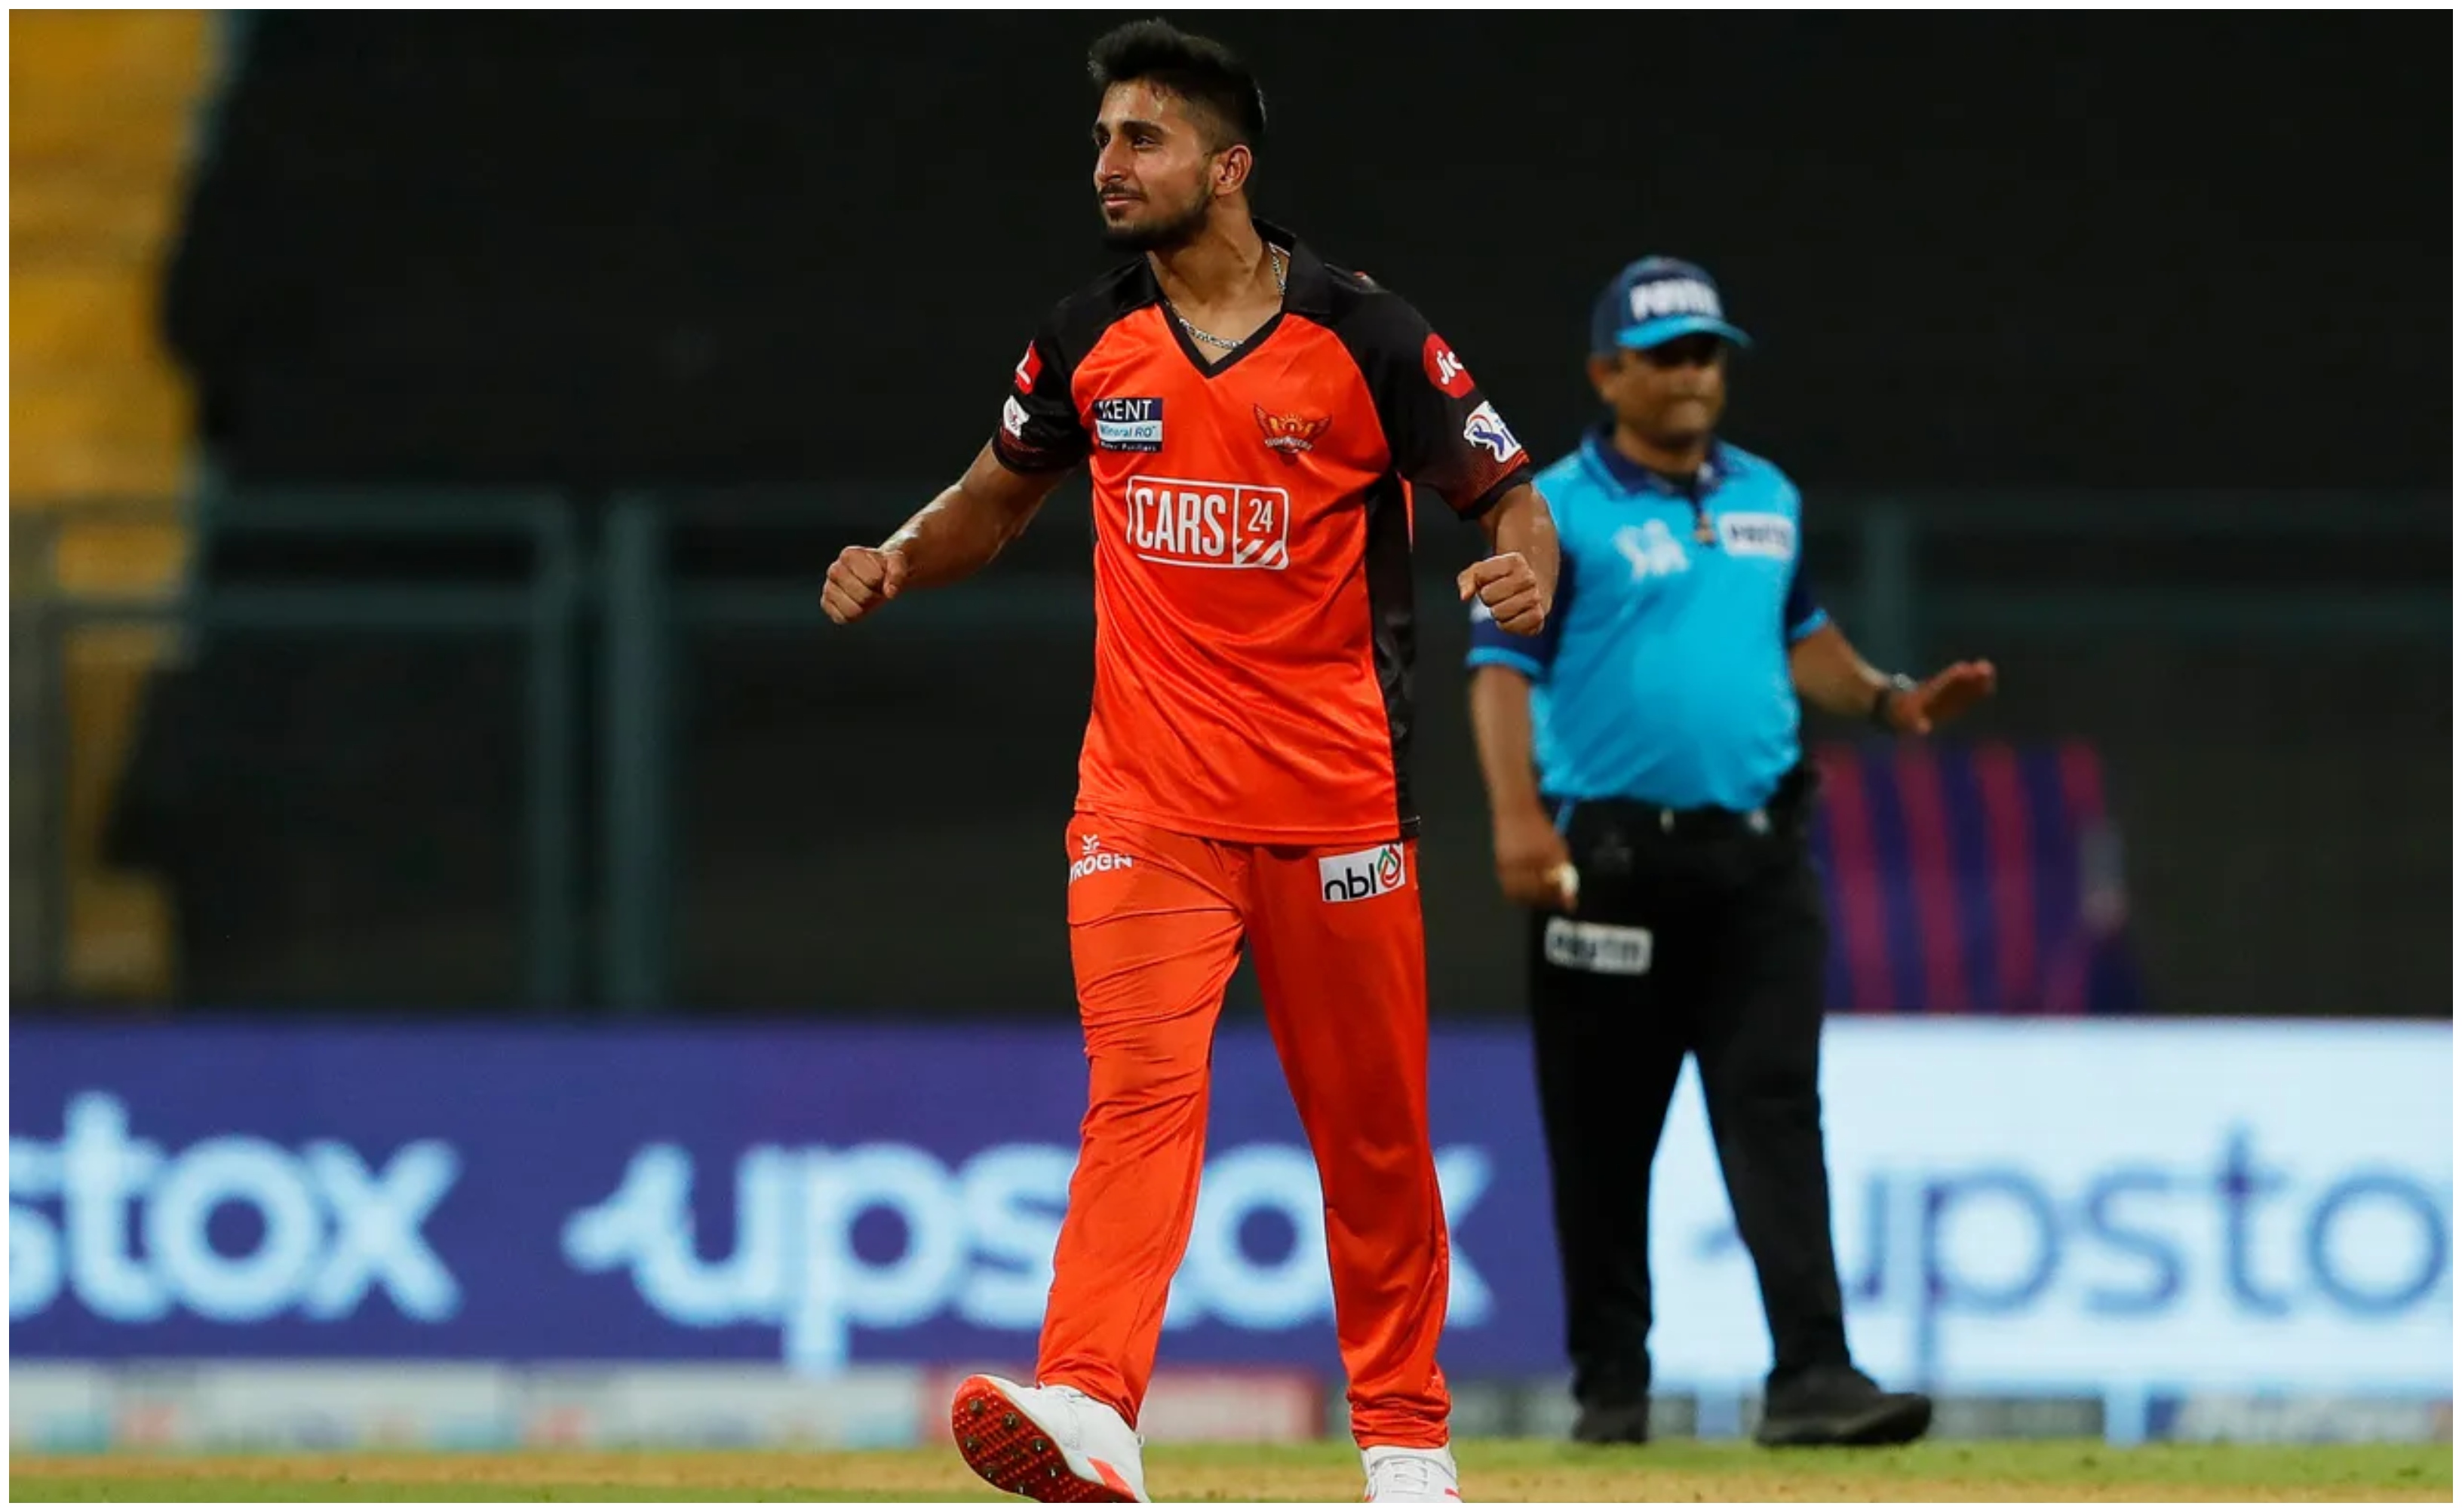 Umran Malik returned with the figures of 3 for 23 in his three overs | BCCI/IPL